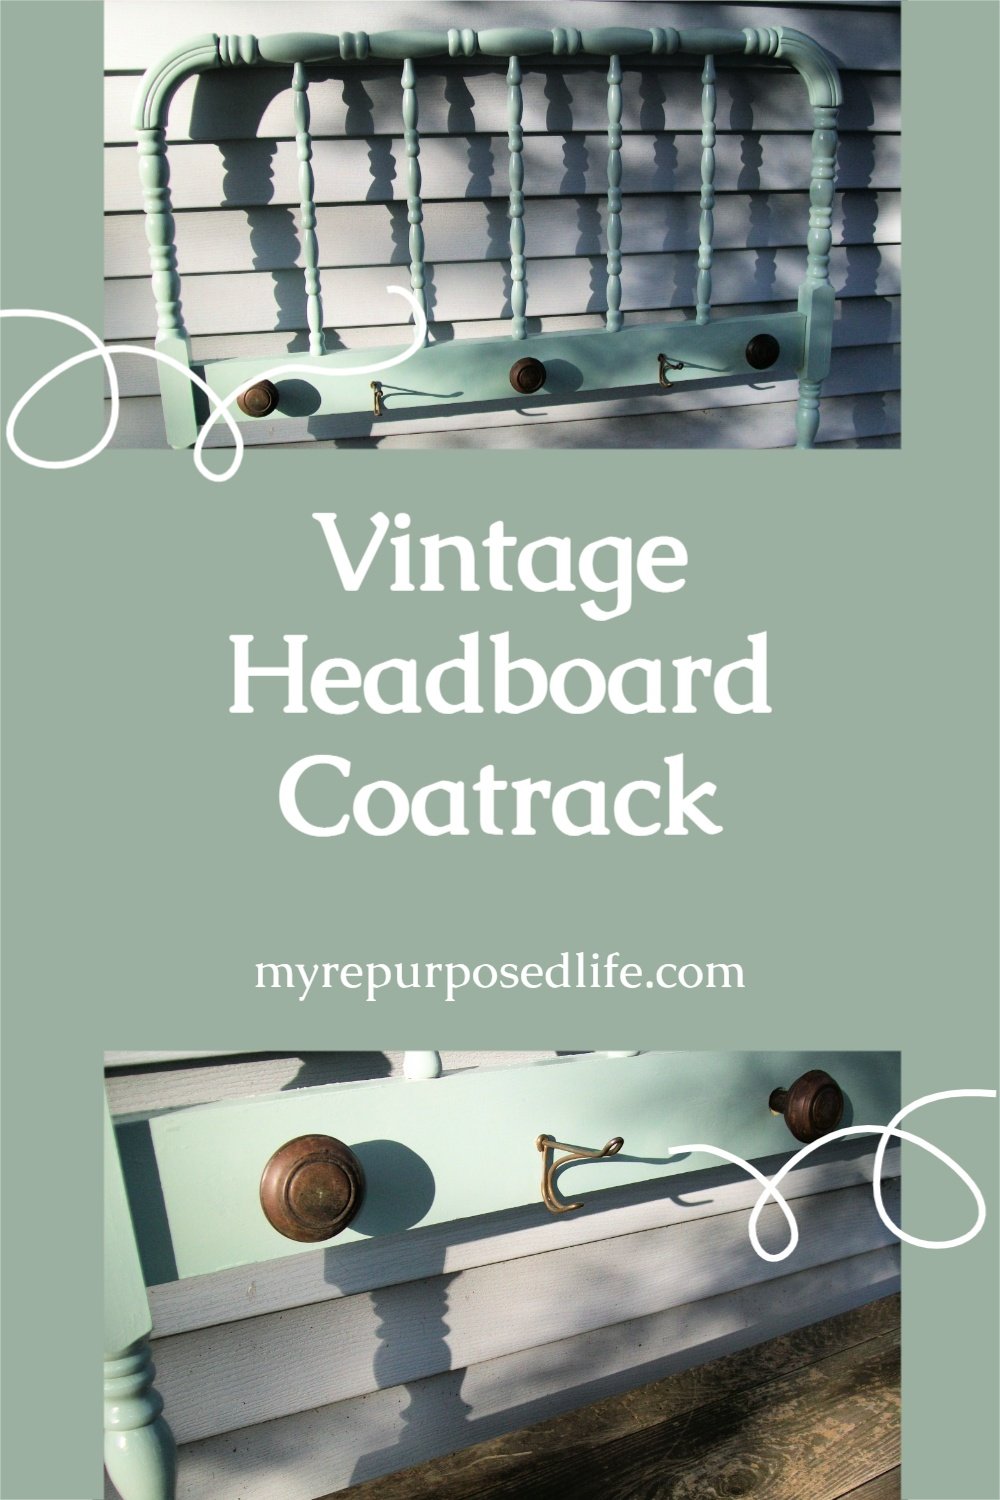 How to make a headboard coat rack using an antique spool bed. Add paint, vintage doorknobs and hooks and you'll be more organized in no time. #MyRepurposedLife #repurposed #headboard #coatrack #antique #doorknobs via @repurposedlife